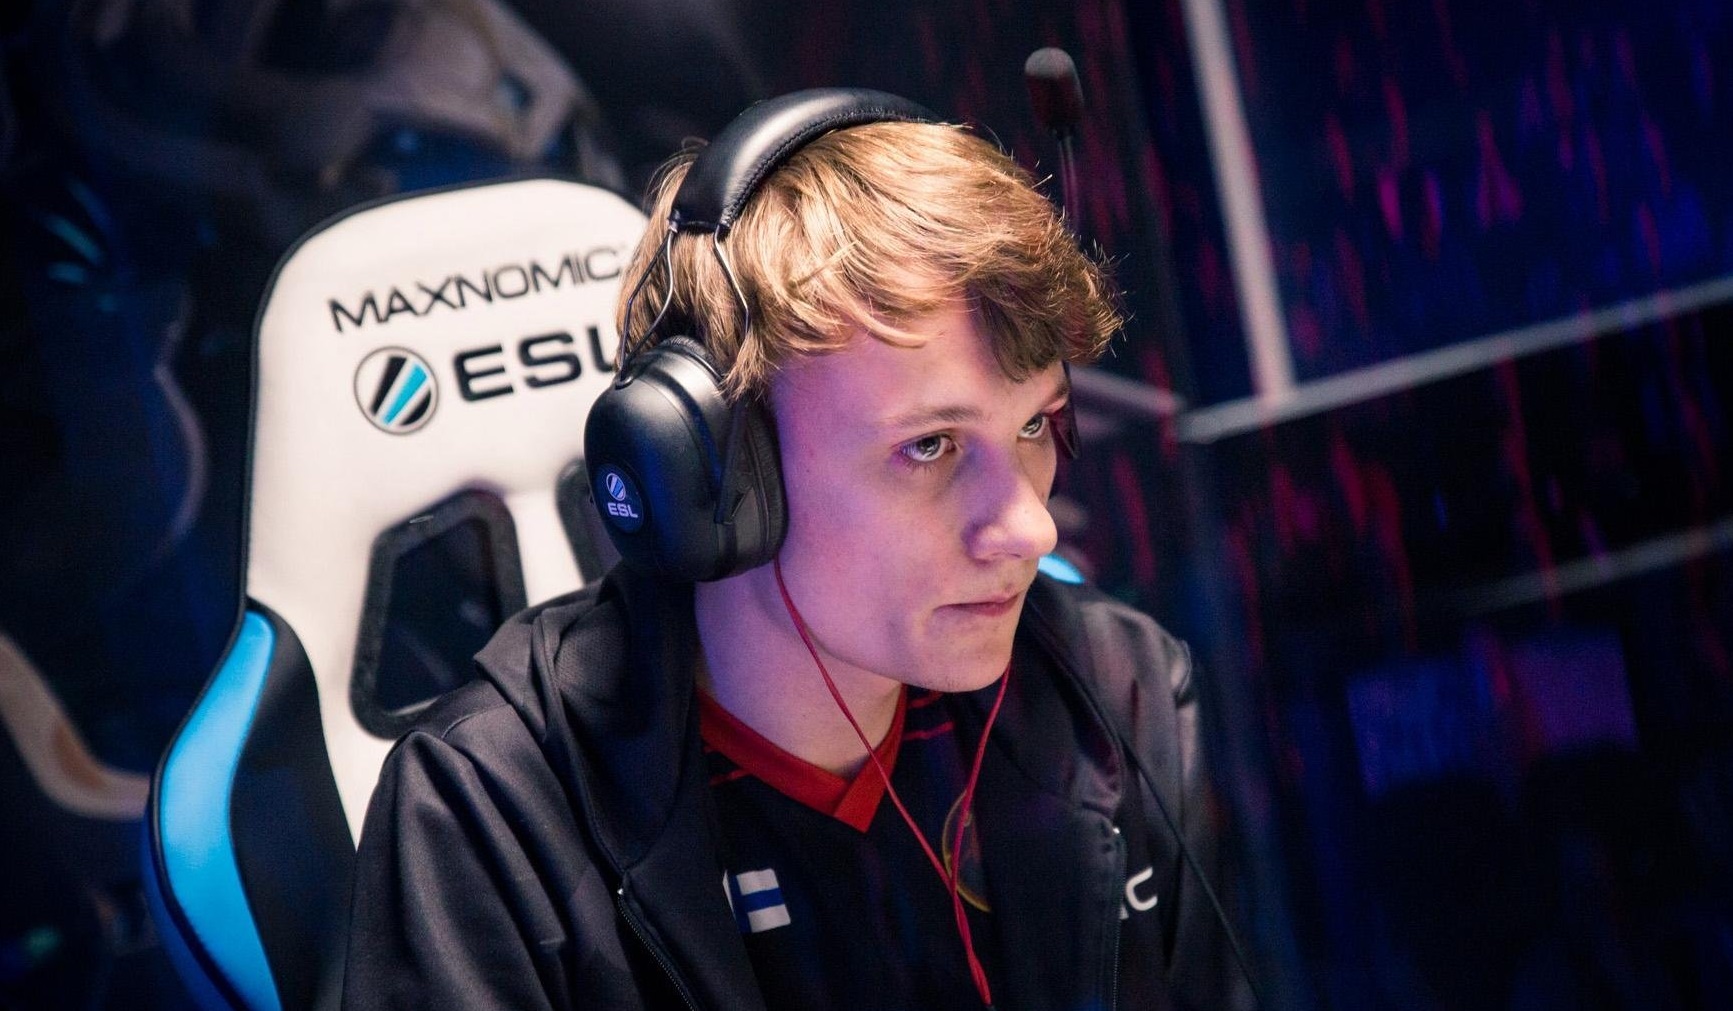 At Katowice, 20-year-old Serral took a shot at becoming the greatest StarCraft 2 pro of all time PC Gamer